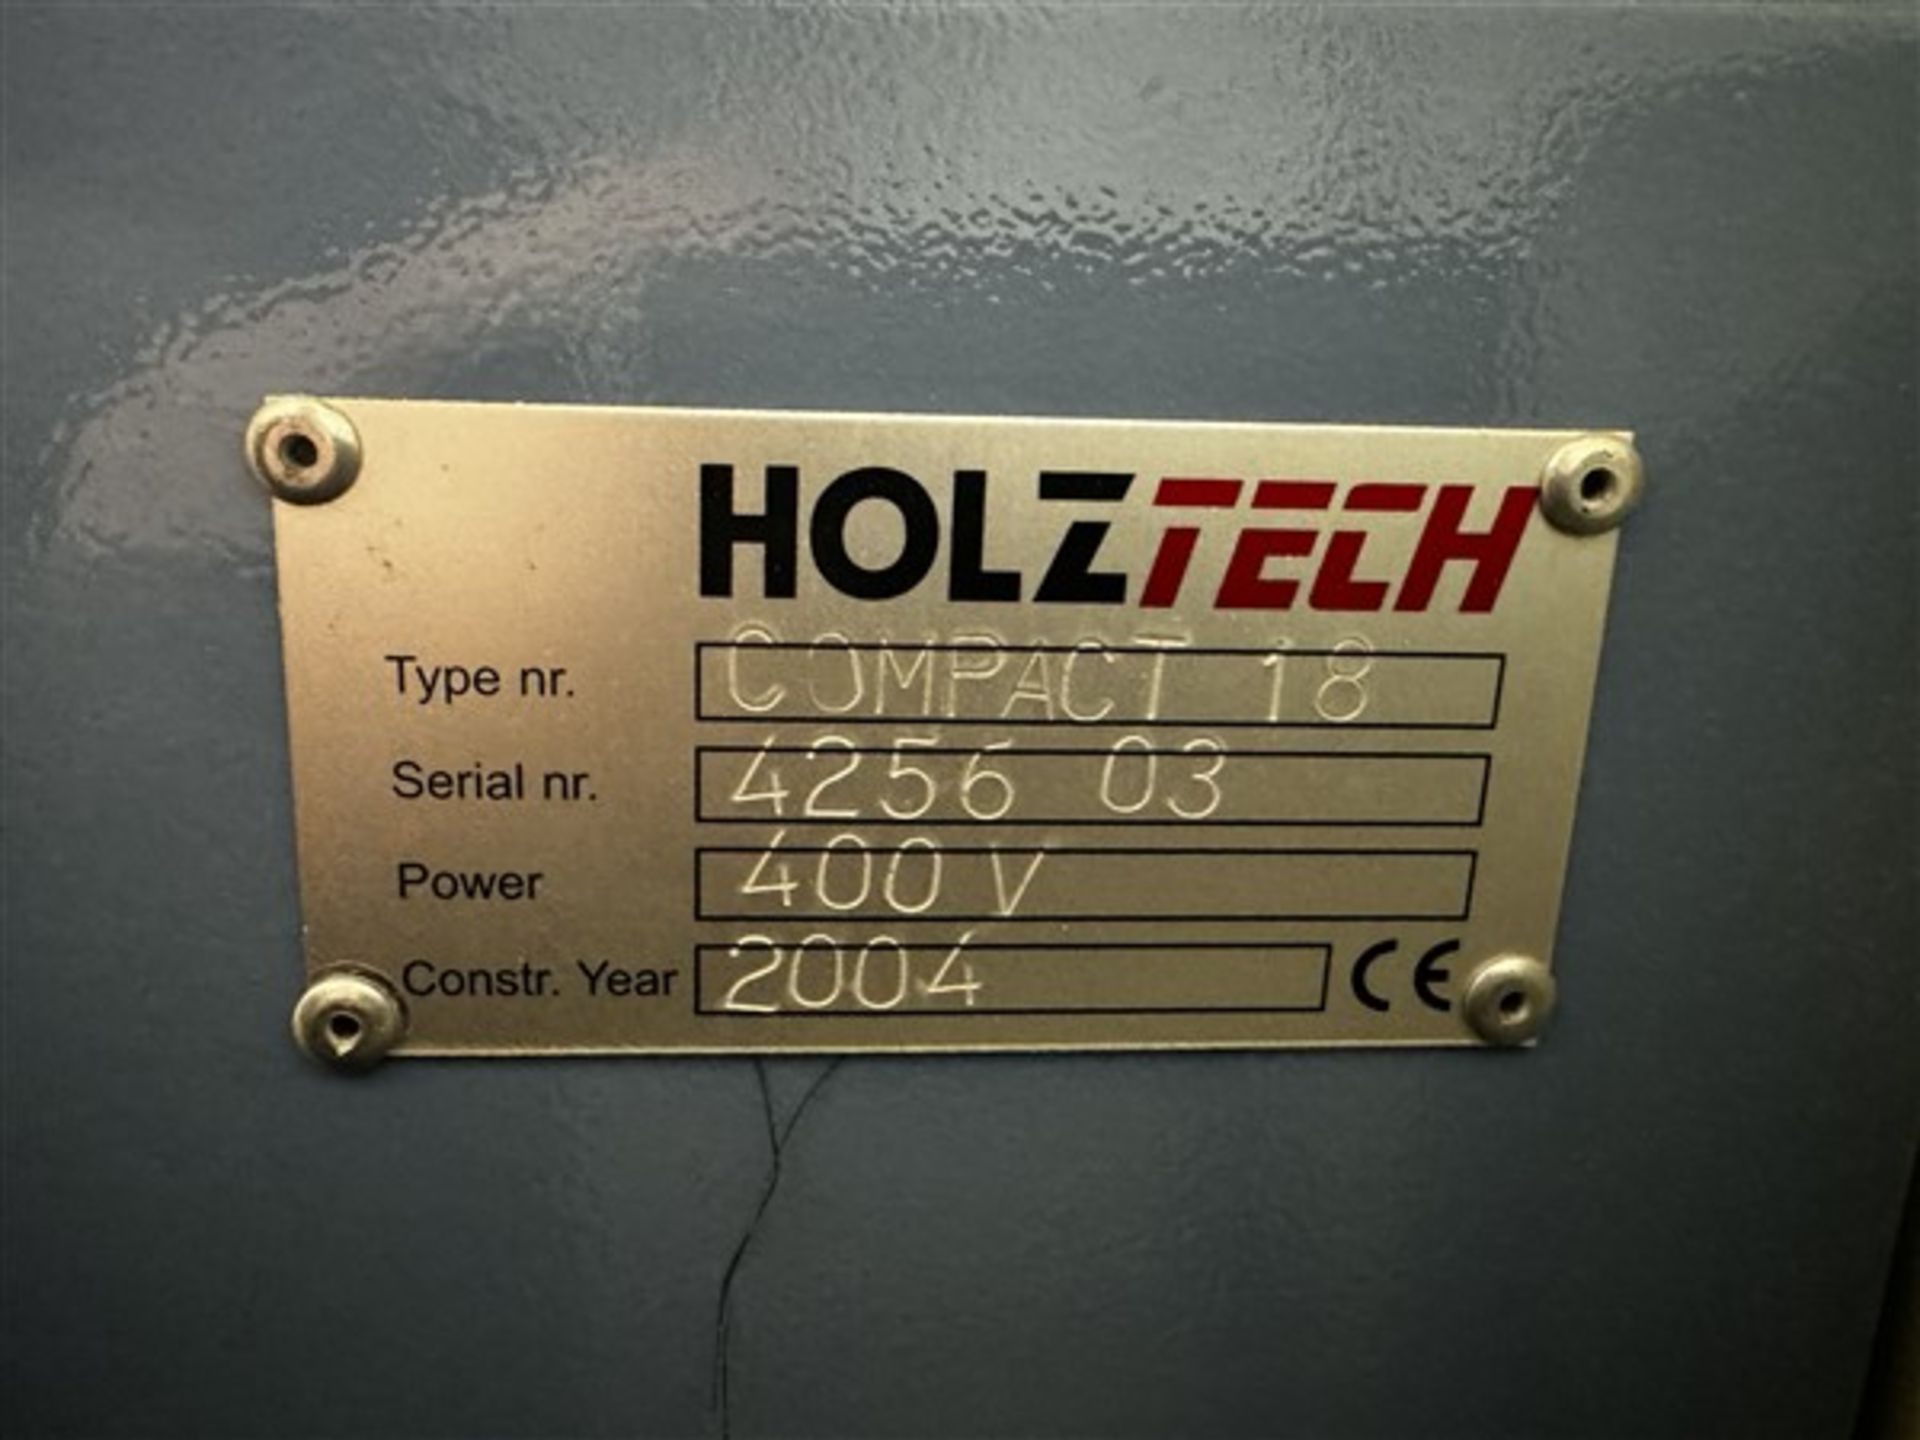 Holtech 4 sided through feed moulder (2004), type Compact 18, serial no. 4255 03, power 400v - Image 5 of 9